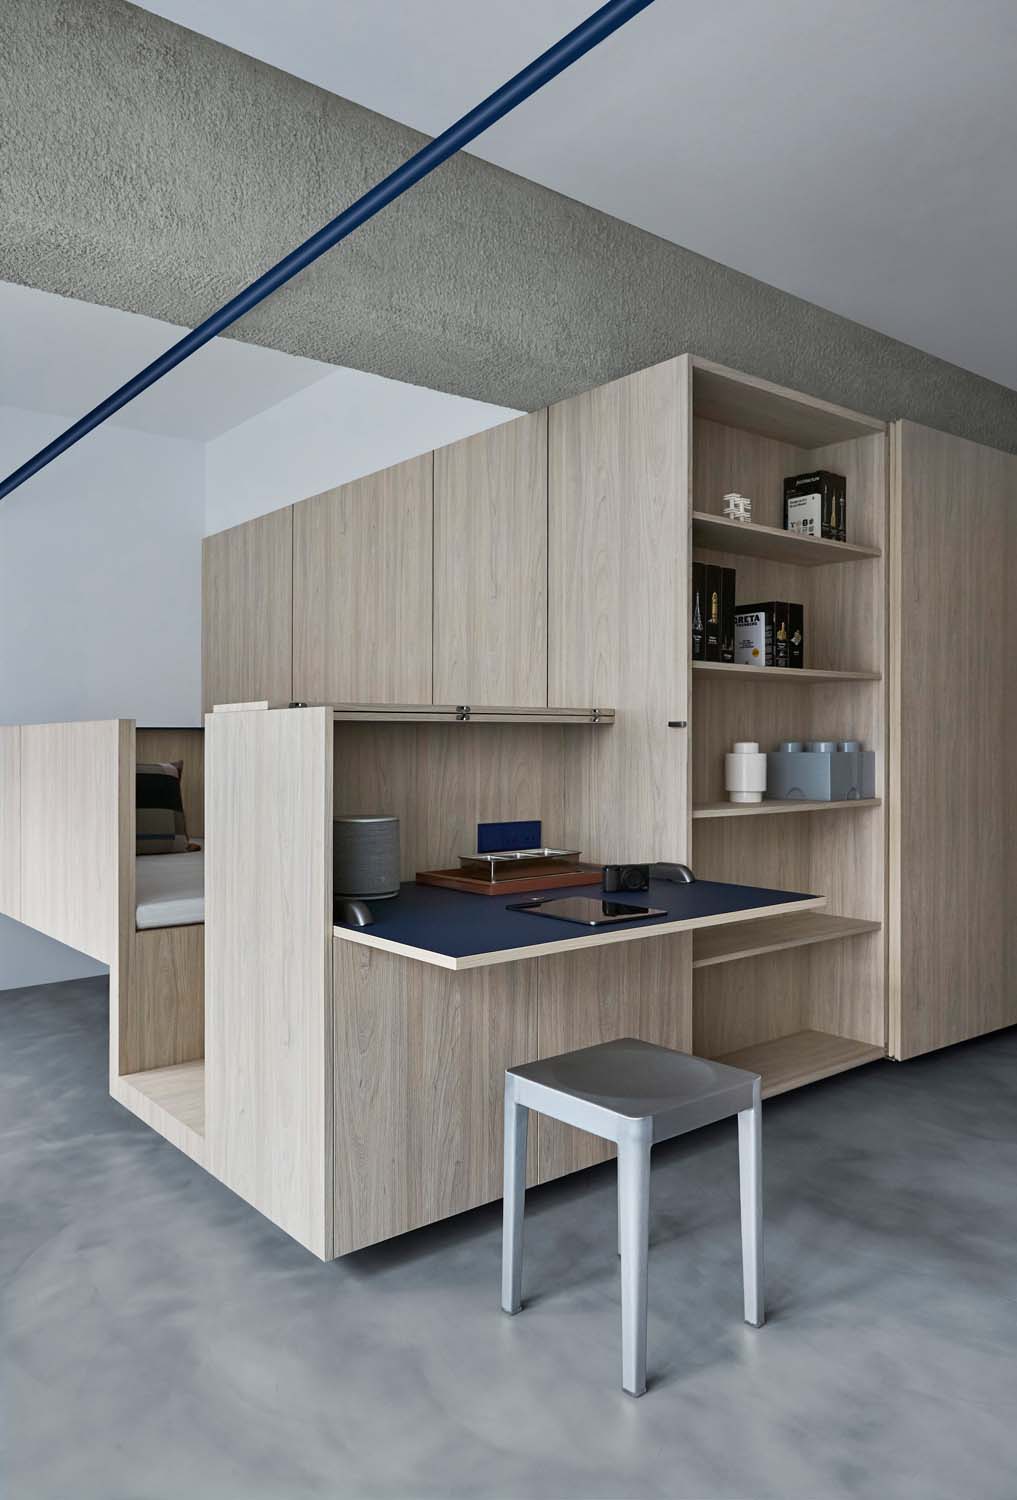 Spacedge Designs Develops a Doorless Single Room Apartment for One